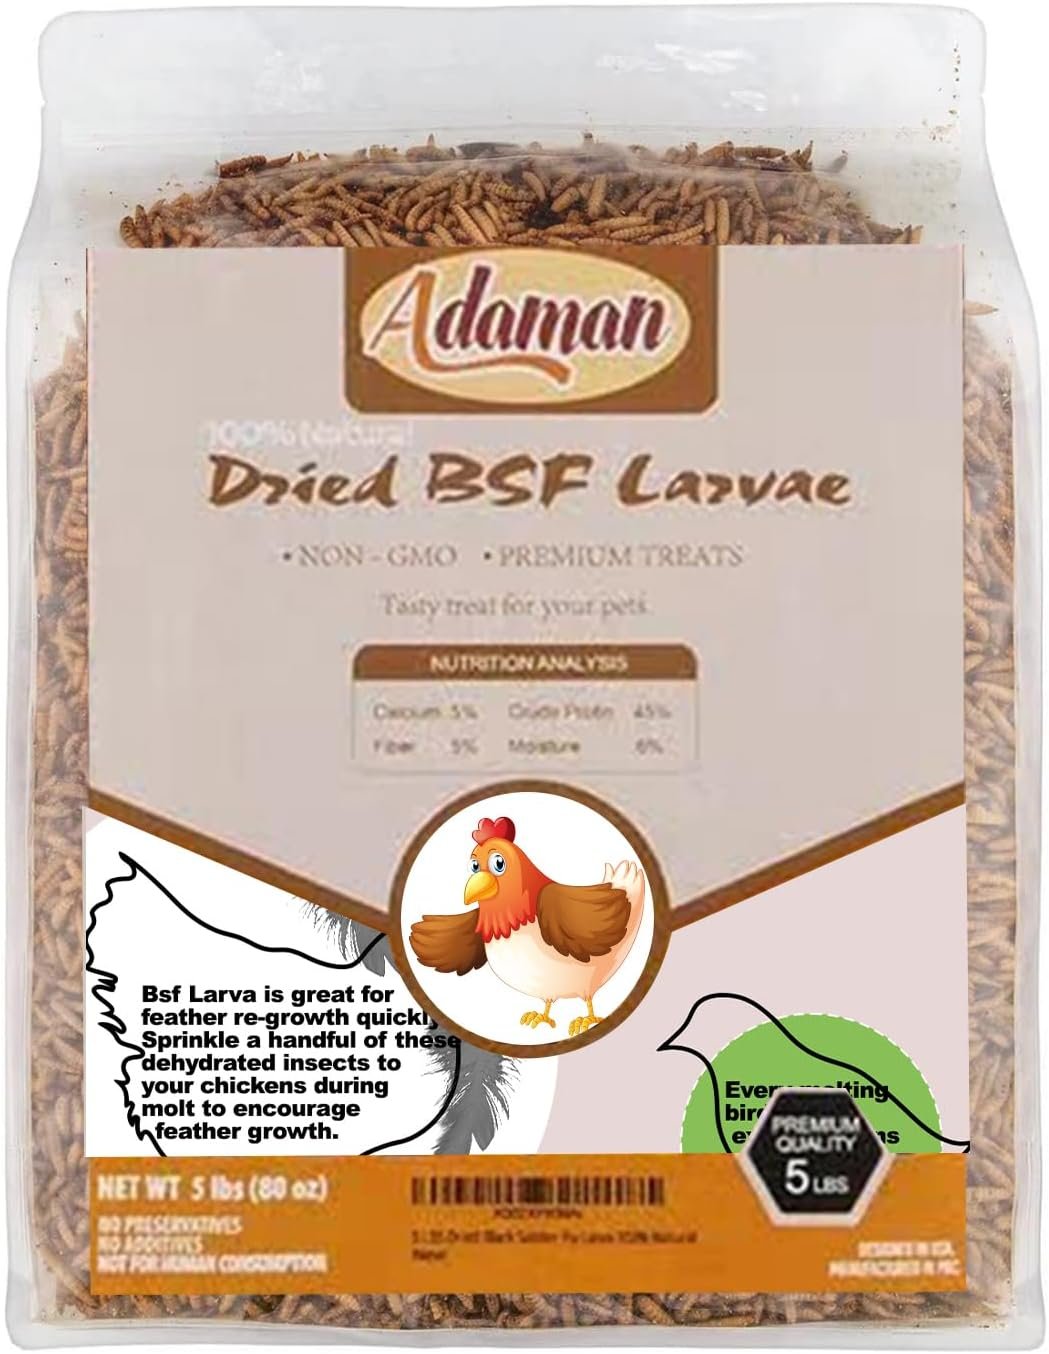 adaman Dried Black Soldier Fly Larvae 5 LBS-100% Natural Non-GMO BSF Larvae-More Calcium Than Dried Mealworms High-Protein Chickens Treats, Food for Wild Birds, Ducks, Layer Hens